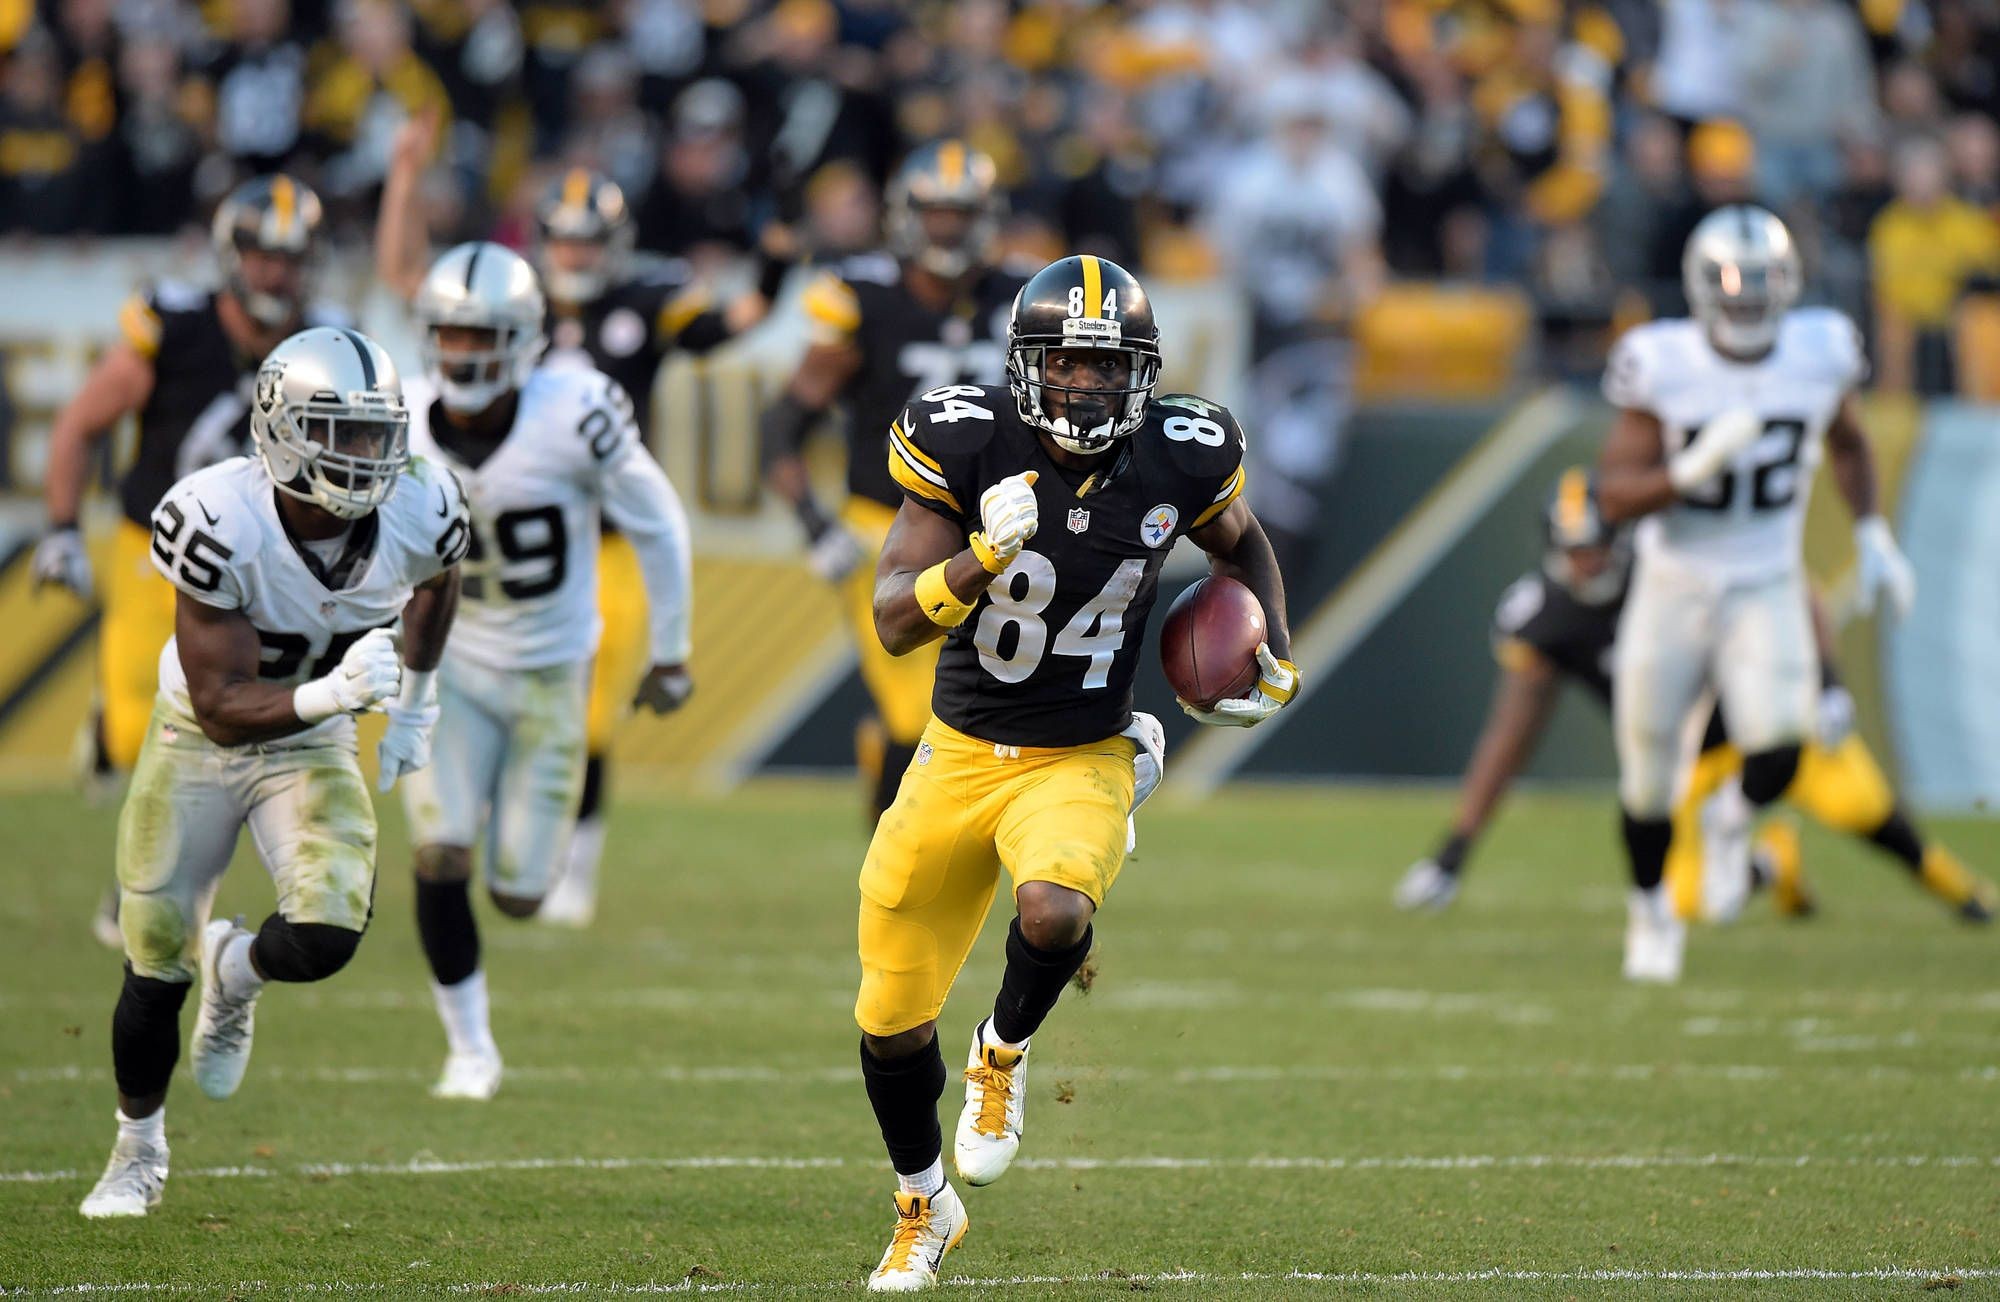 Antonio Brown wallpaper ·① Download free awesome HD ...